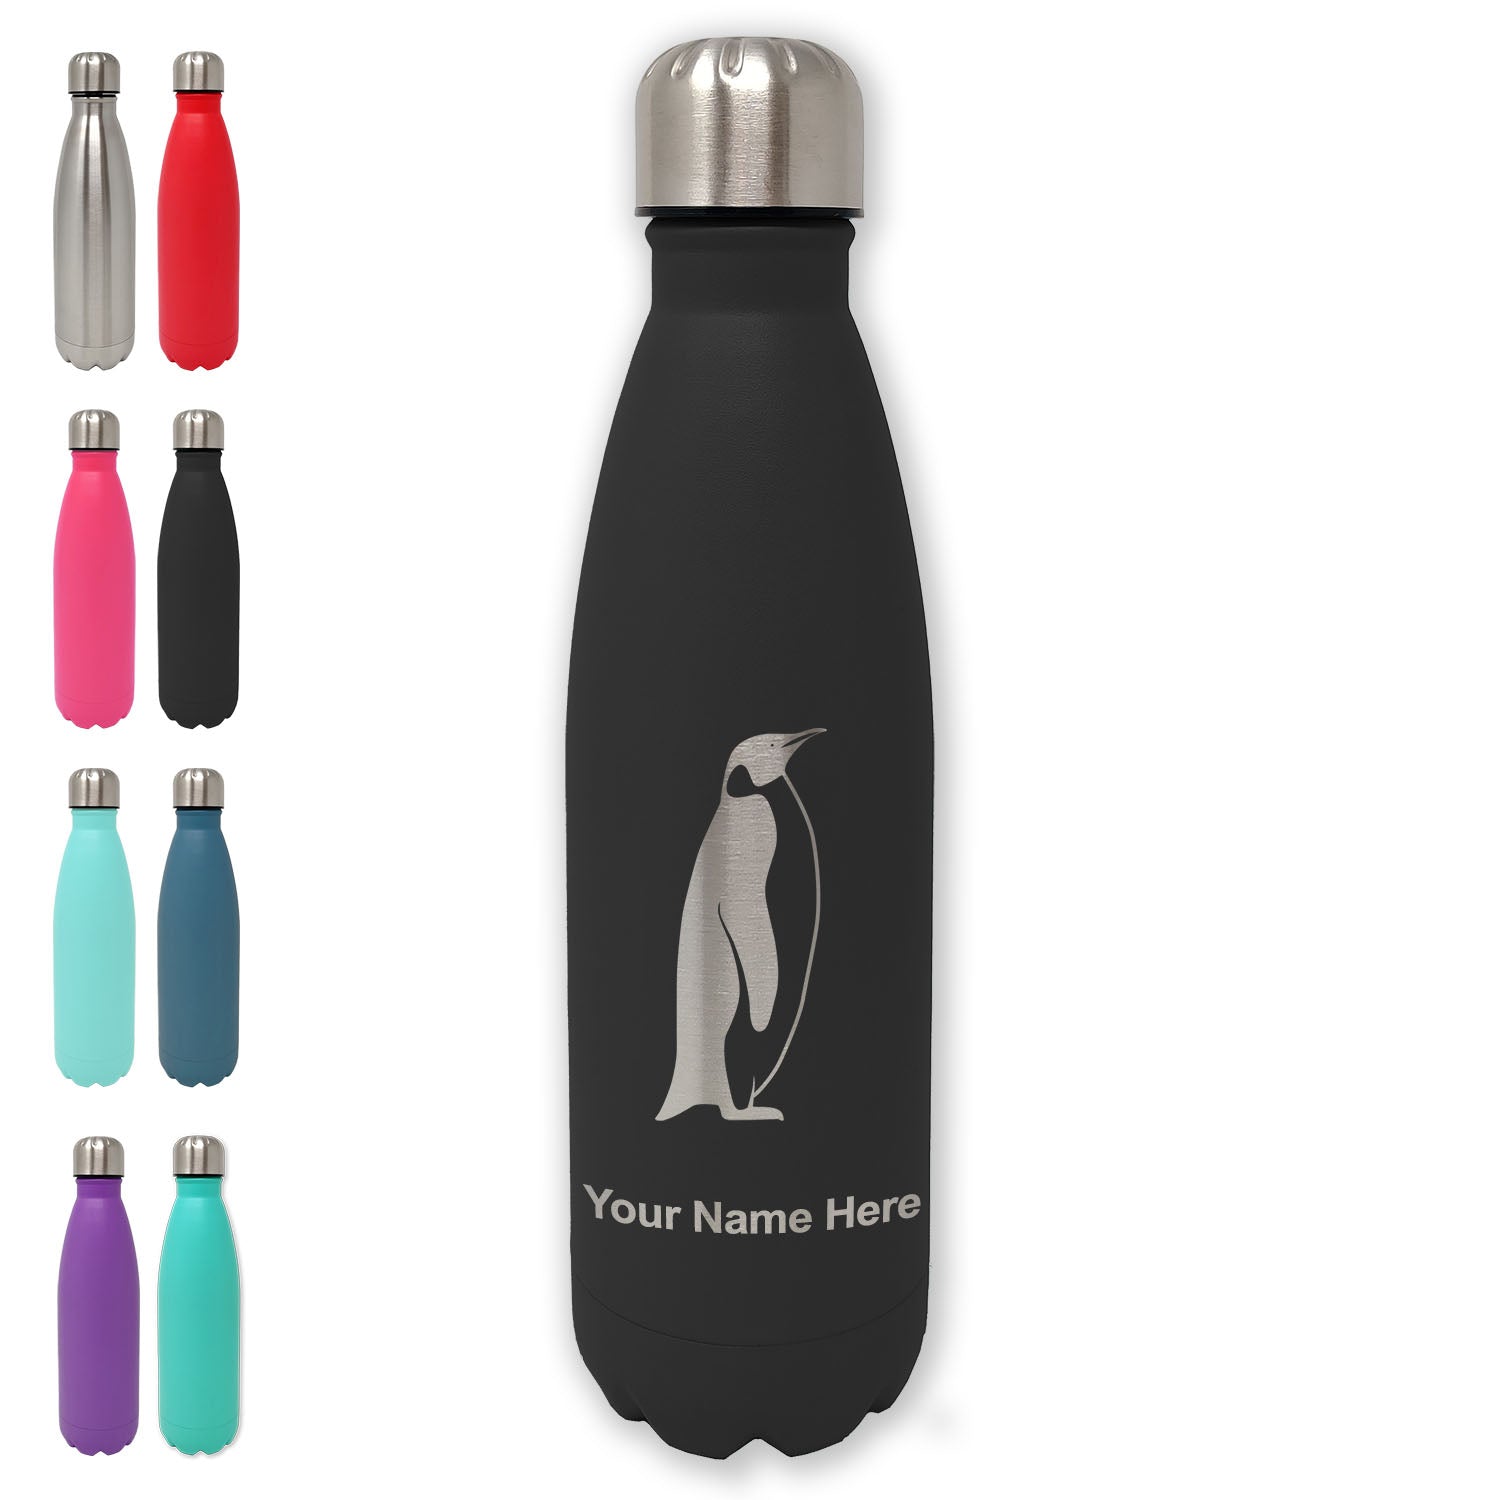 Personalised Water Bottle Vacuum Insulated Stainless Steel Chilly